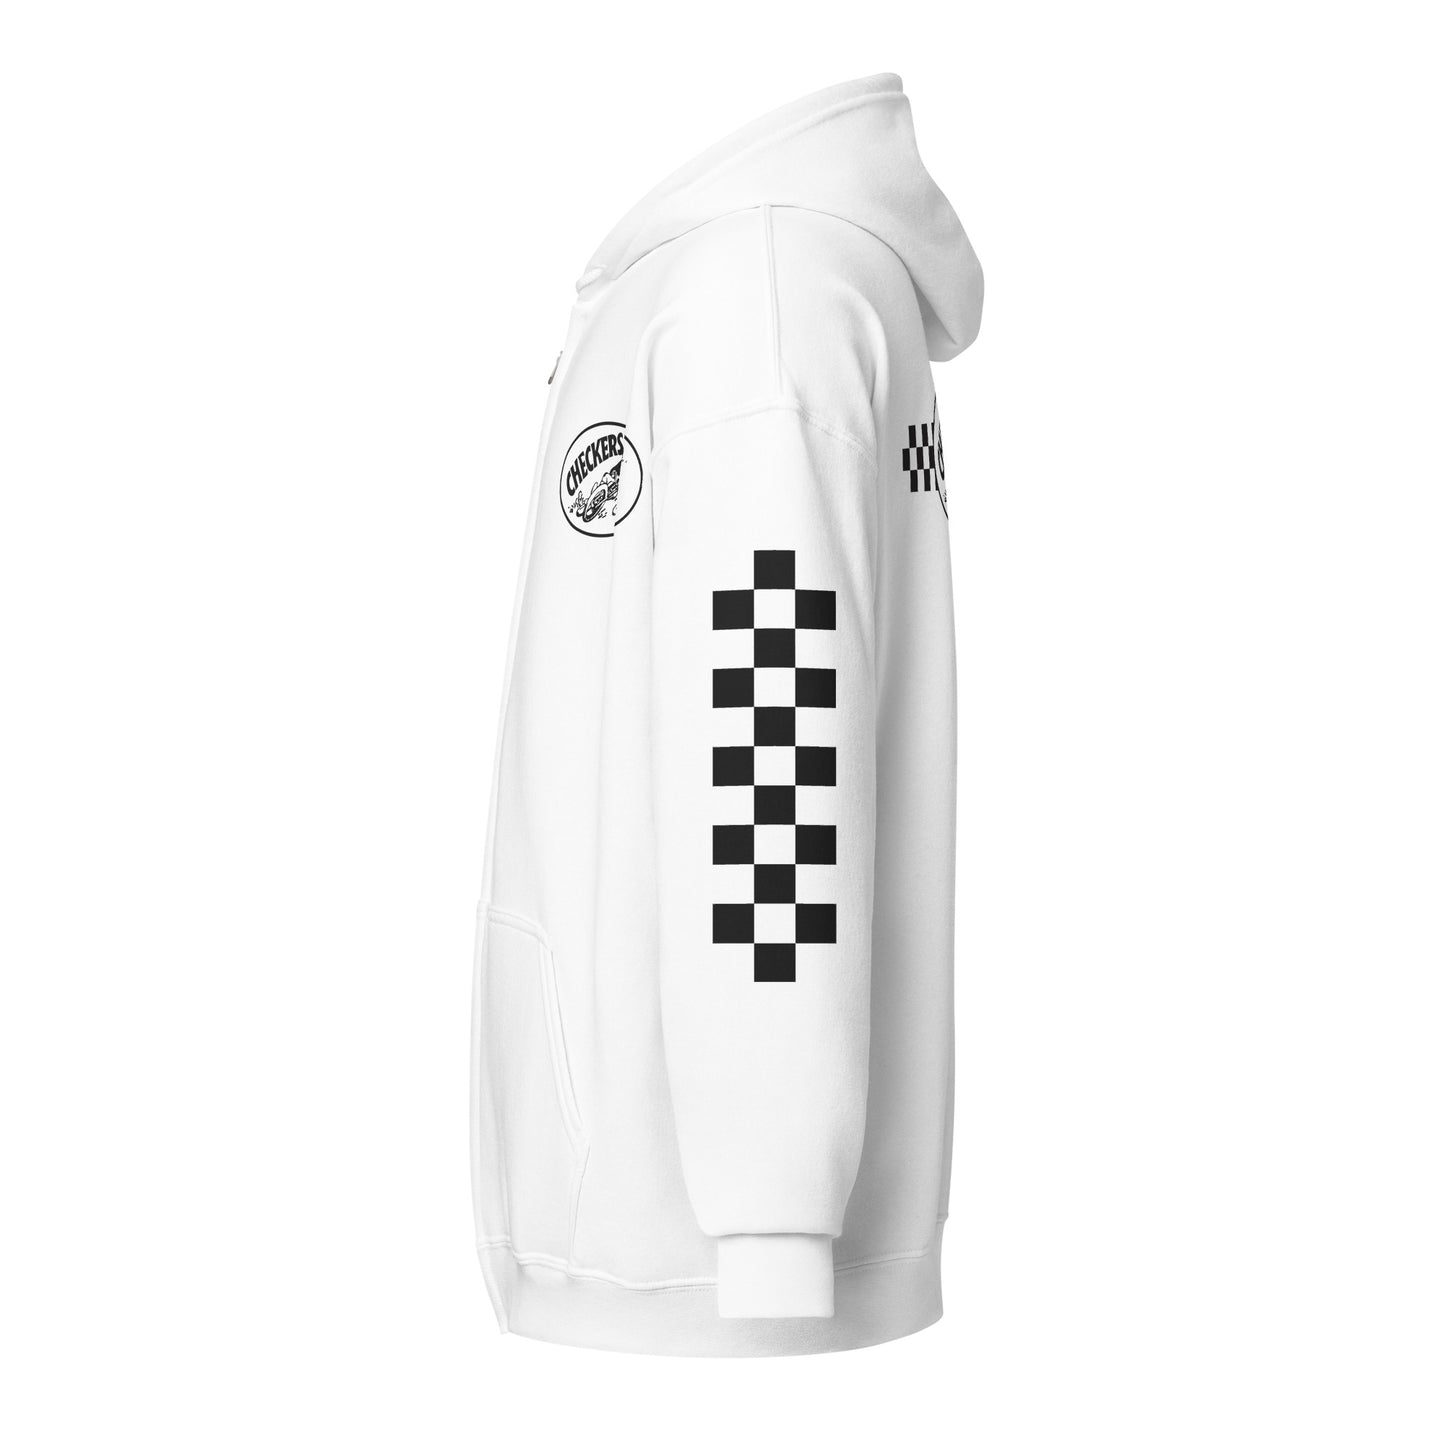 Checkers MC Zip Up Hoodie w/ Checkered Sleeves - Official Club Apparel